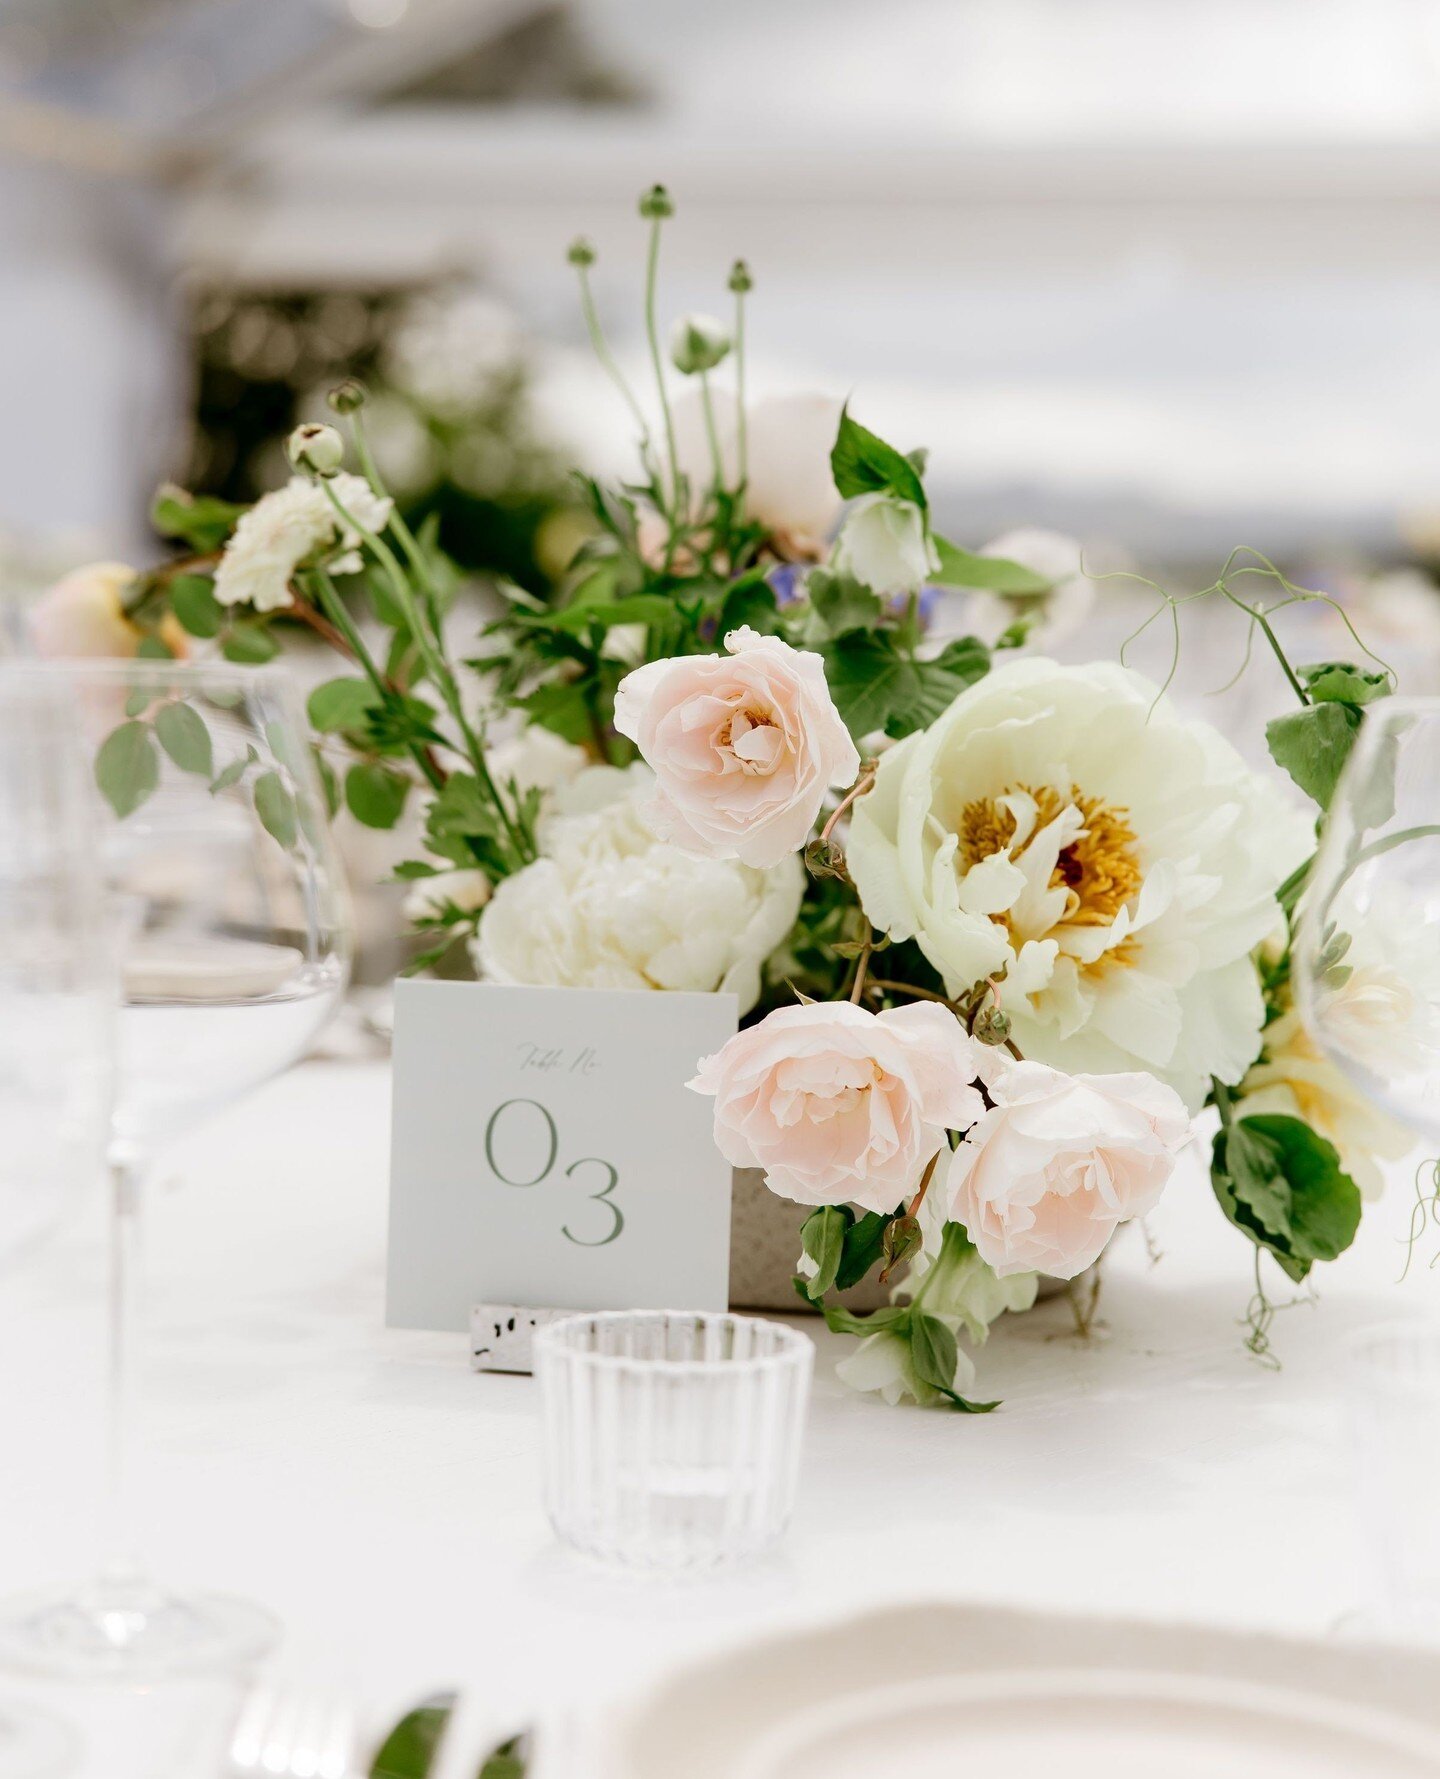 Square table numbers in sage green looking elegant amongst the florals. Swipe to see more reception pics from Z&amp;Gs day x⁠
⁠
Photographer @brijanacatoweddings⁠
Styling &amp; Planning @onelovelydaystyling⁠
Wedding Location - Private family farm, Ma